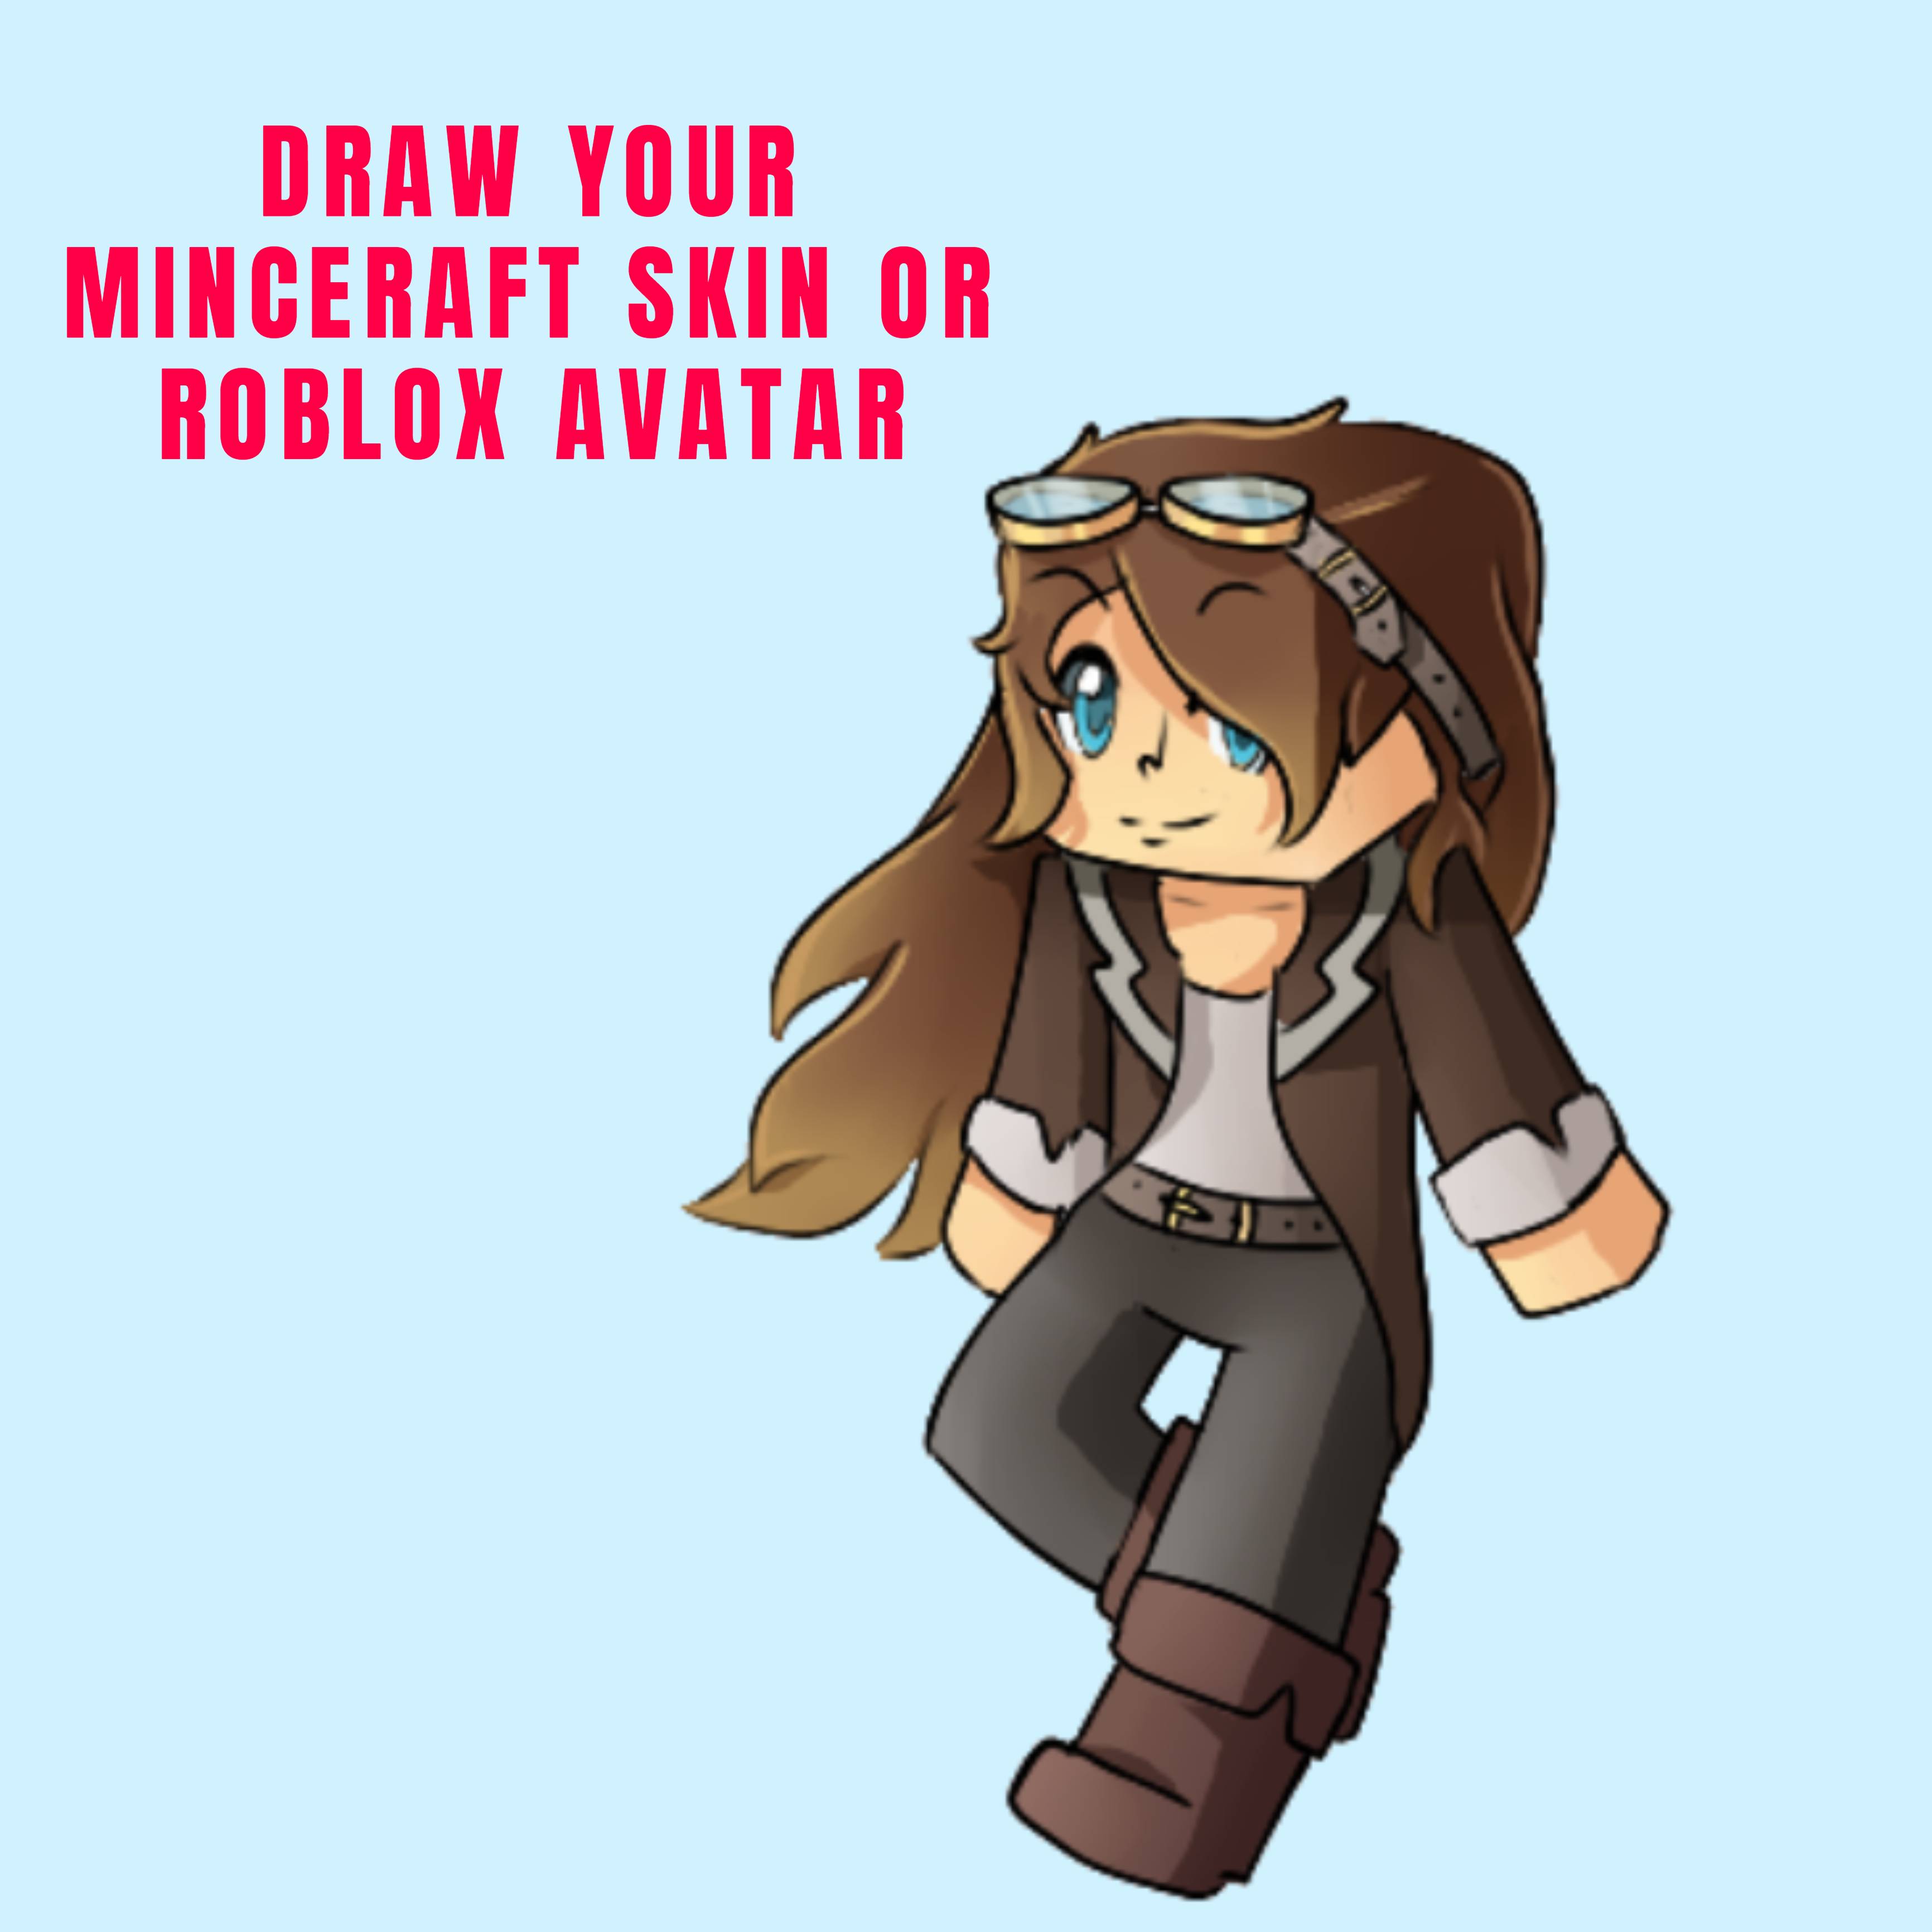 Draw Your Minecraft Skin Or Roblox Avatar By Asmae Daoud - roblox avatar girl with brown hair